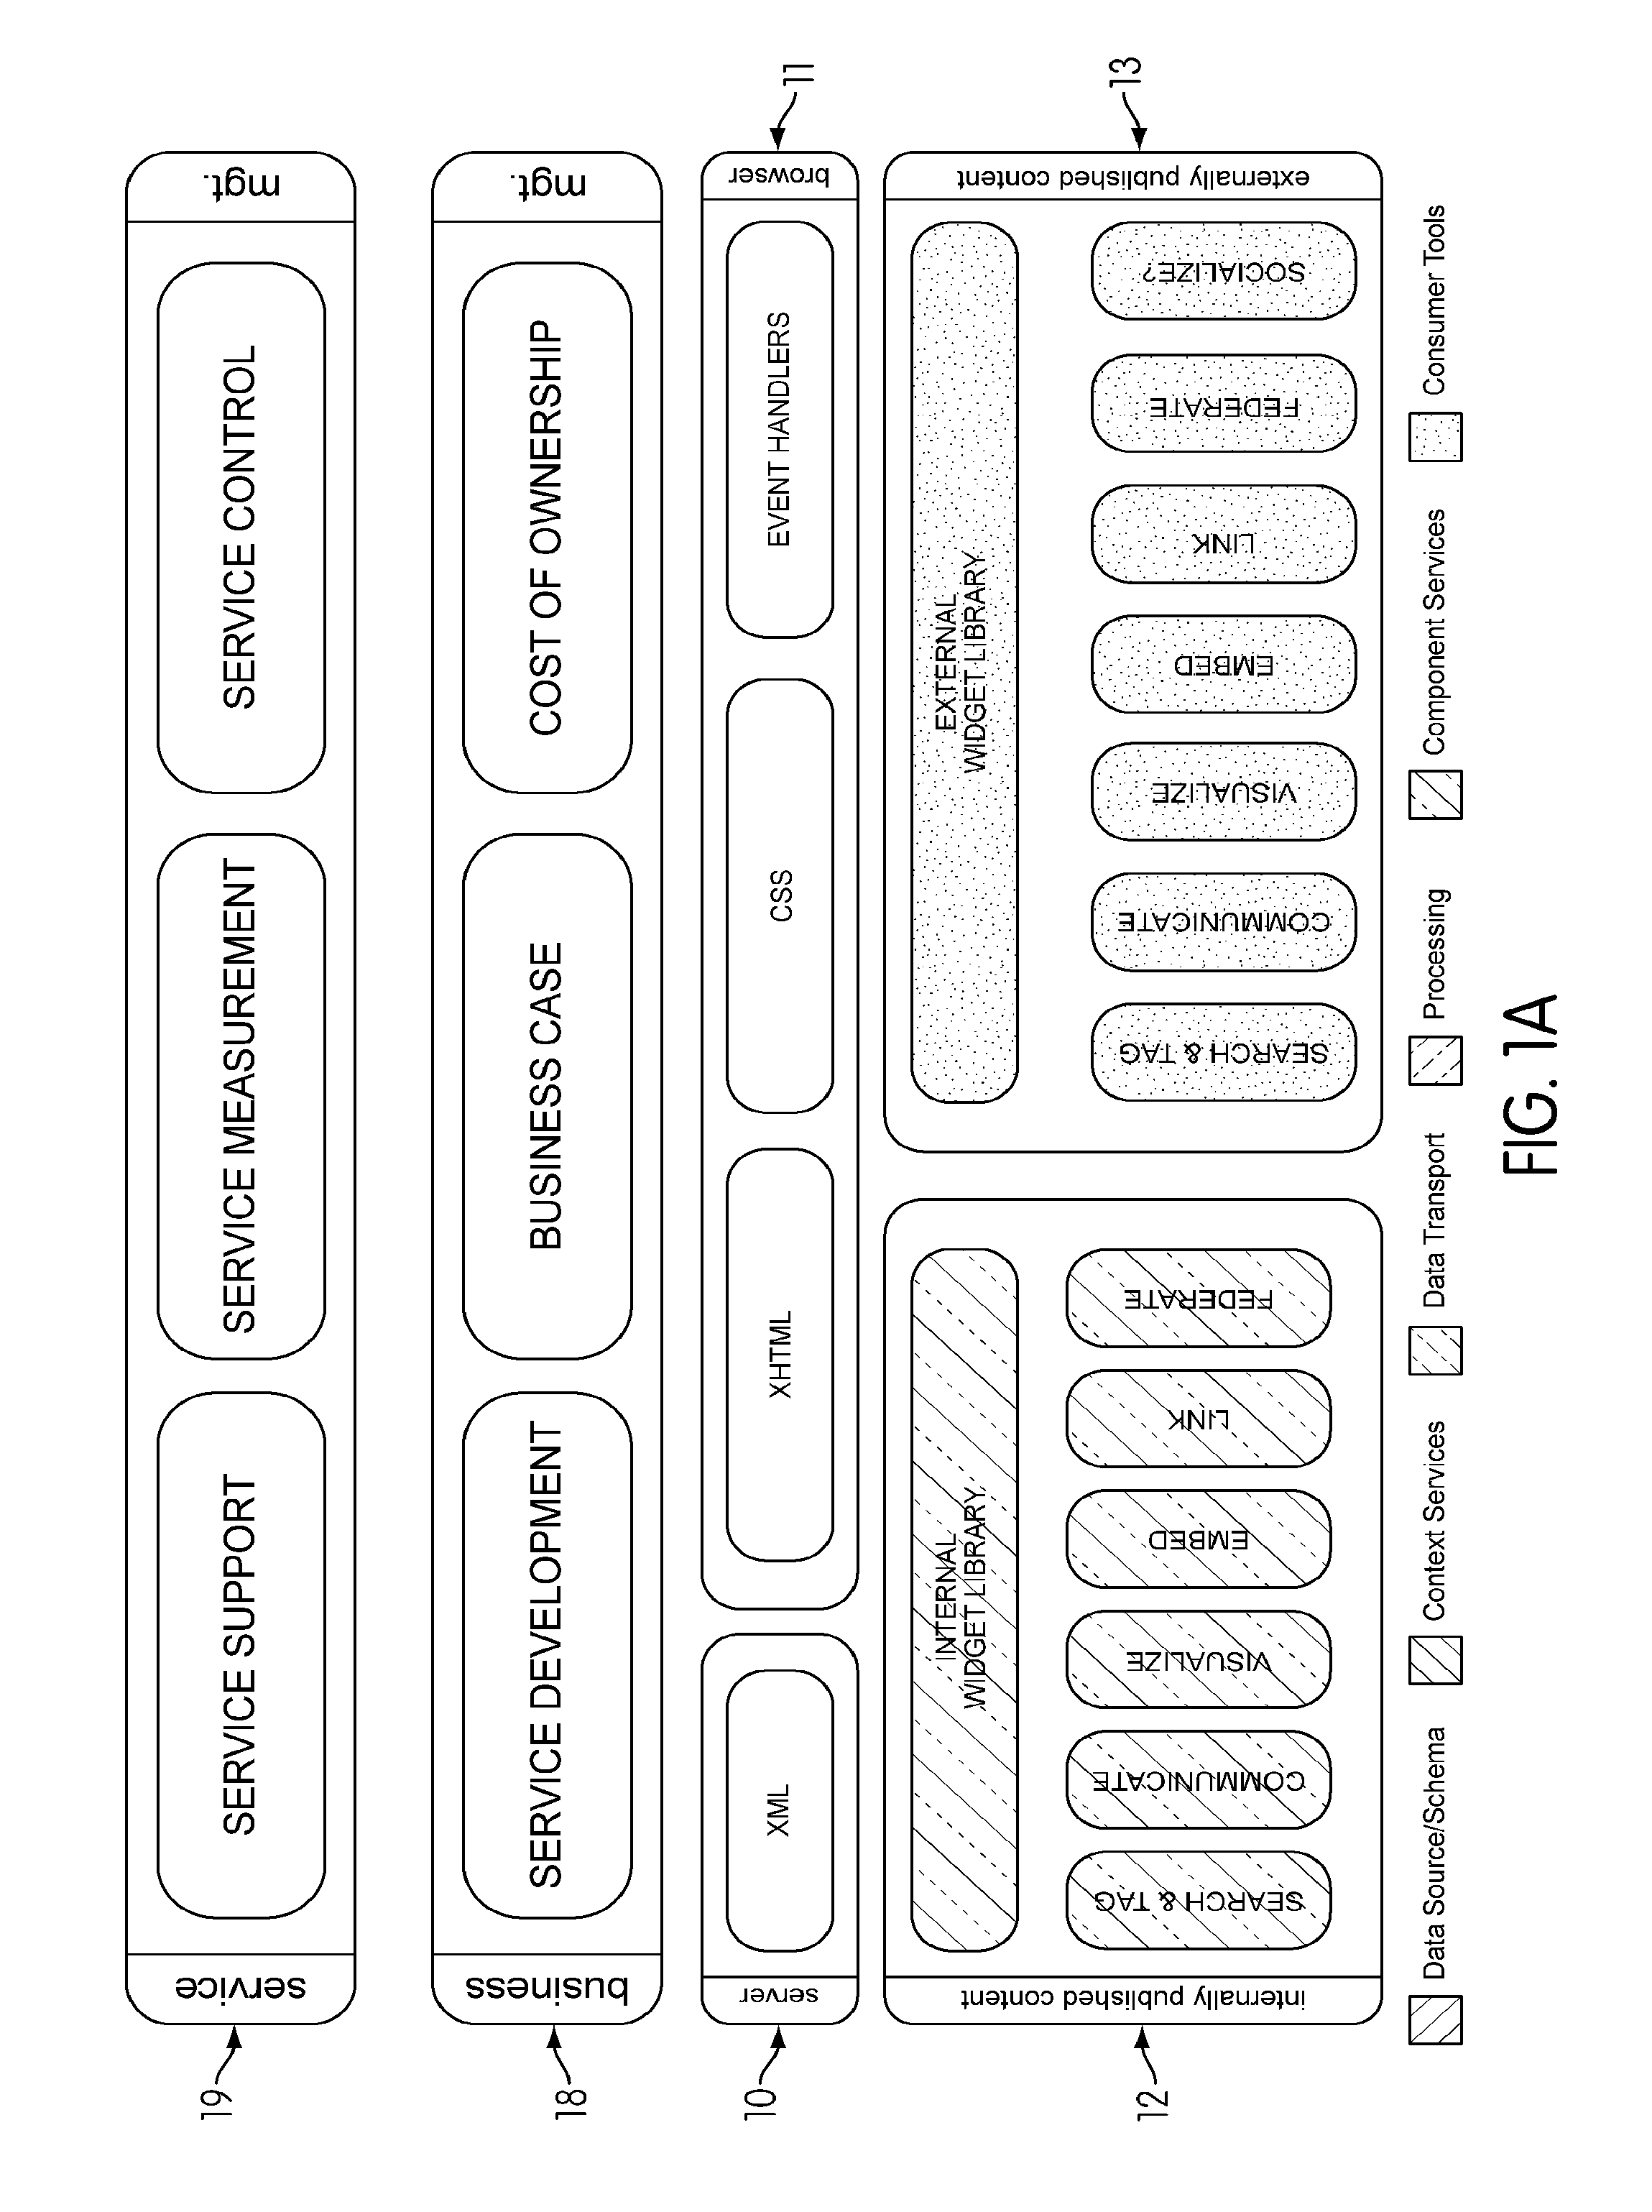 Enterprise Architecture System and Method